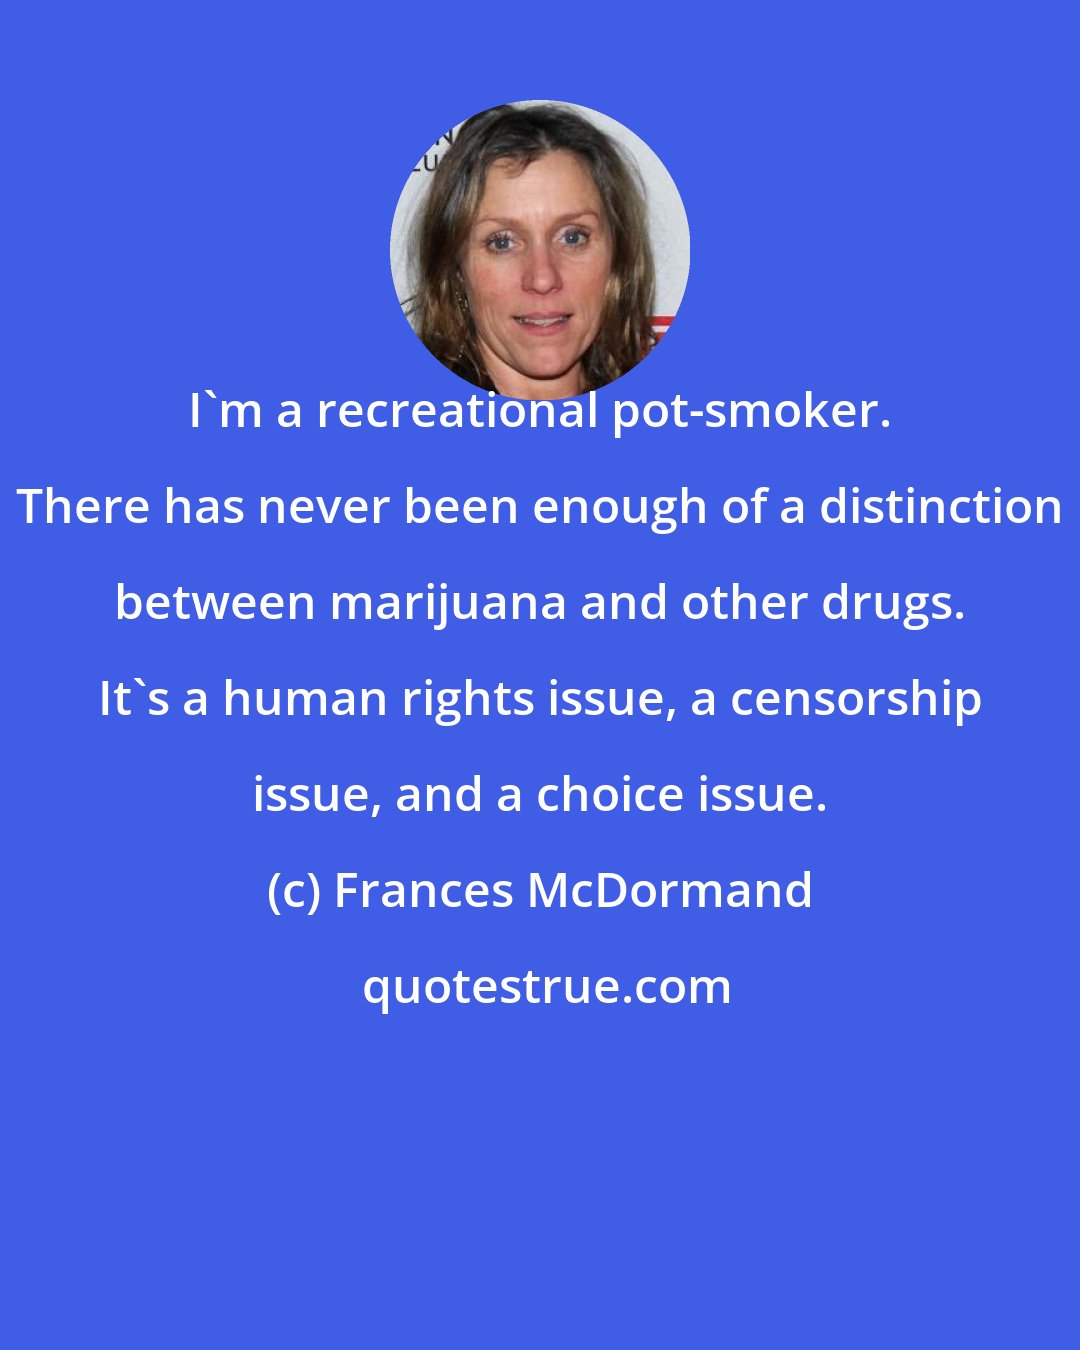 Frances McDormand: I'm a recreational pot-smoker. There has never been enough of a distinction between marijuana and other drugs. It's a human rights issue, a censorship issue, and a choice issue.